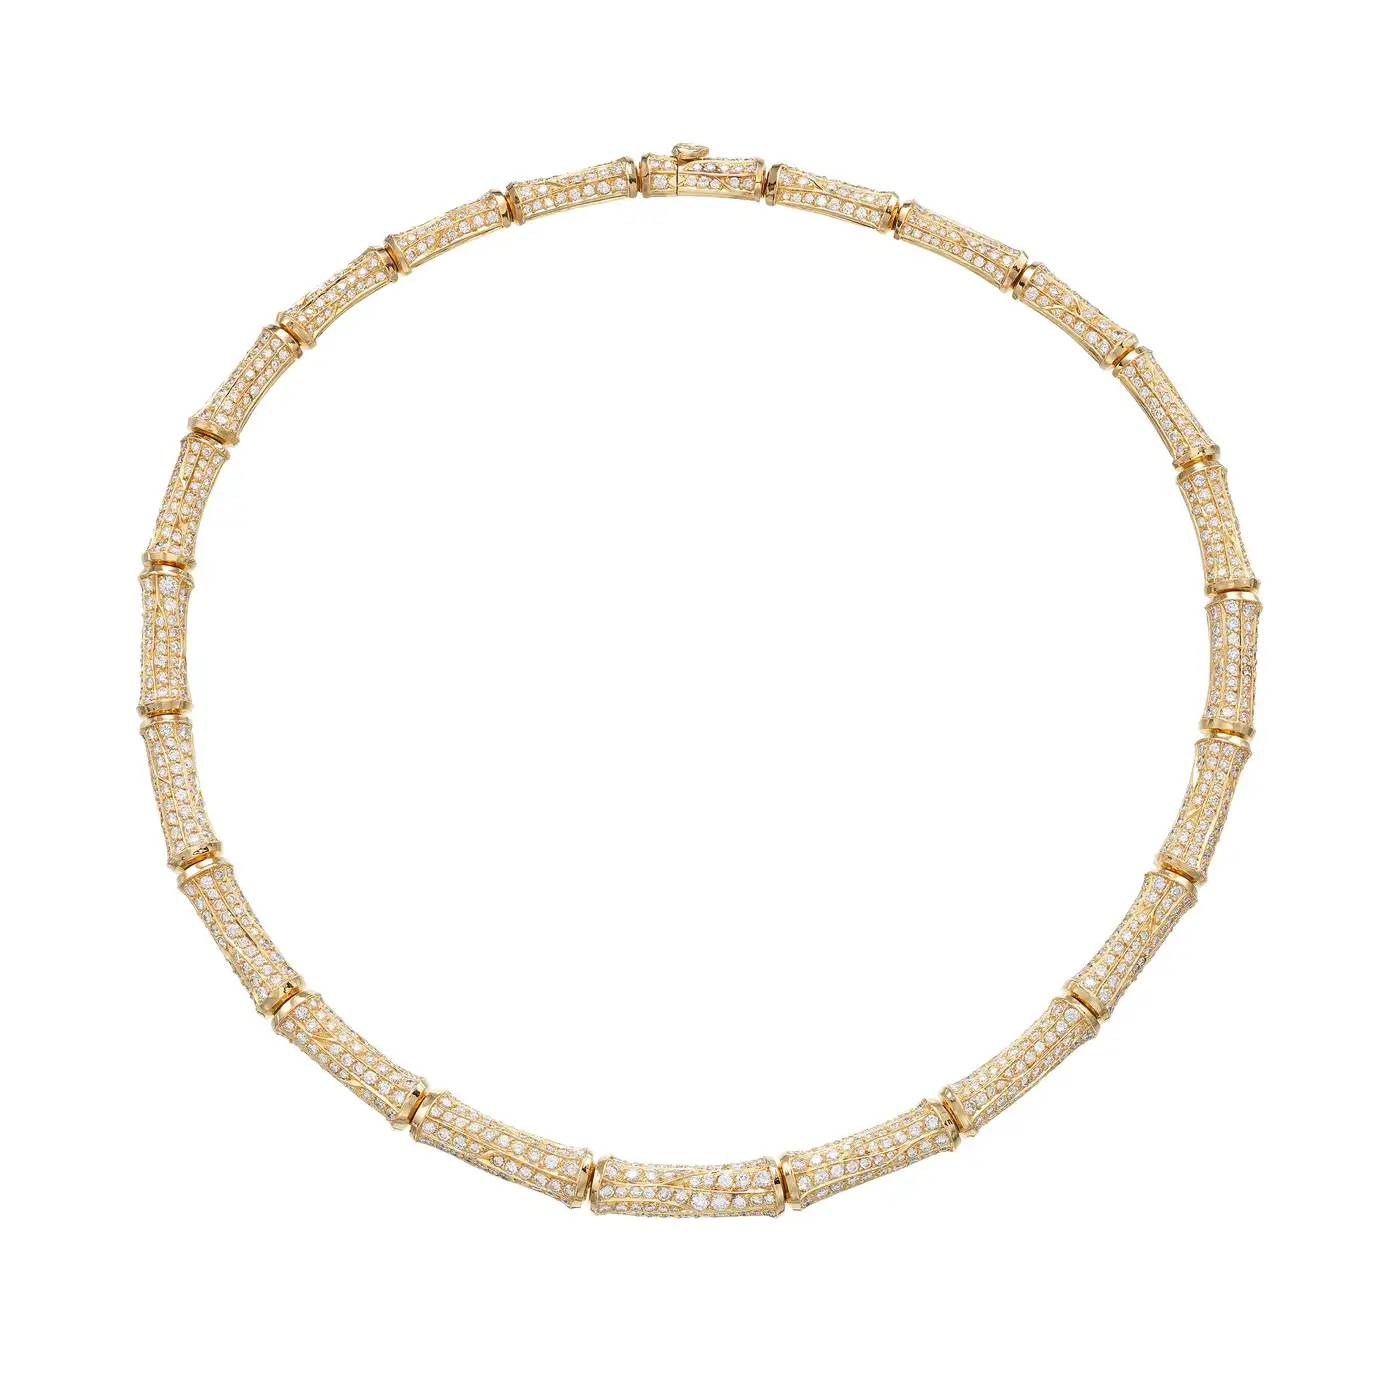 Cartier-26cts-Diamond-Bamboo-Suite-in-18K-Gold-Necklace-and-Earrings-10.webp